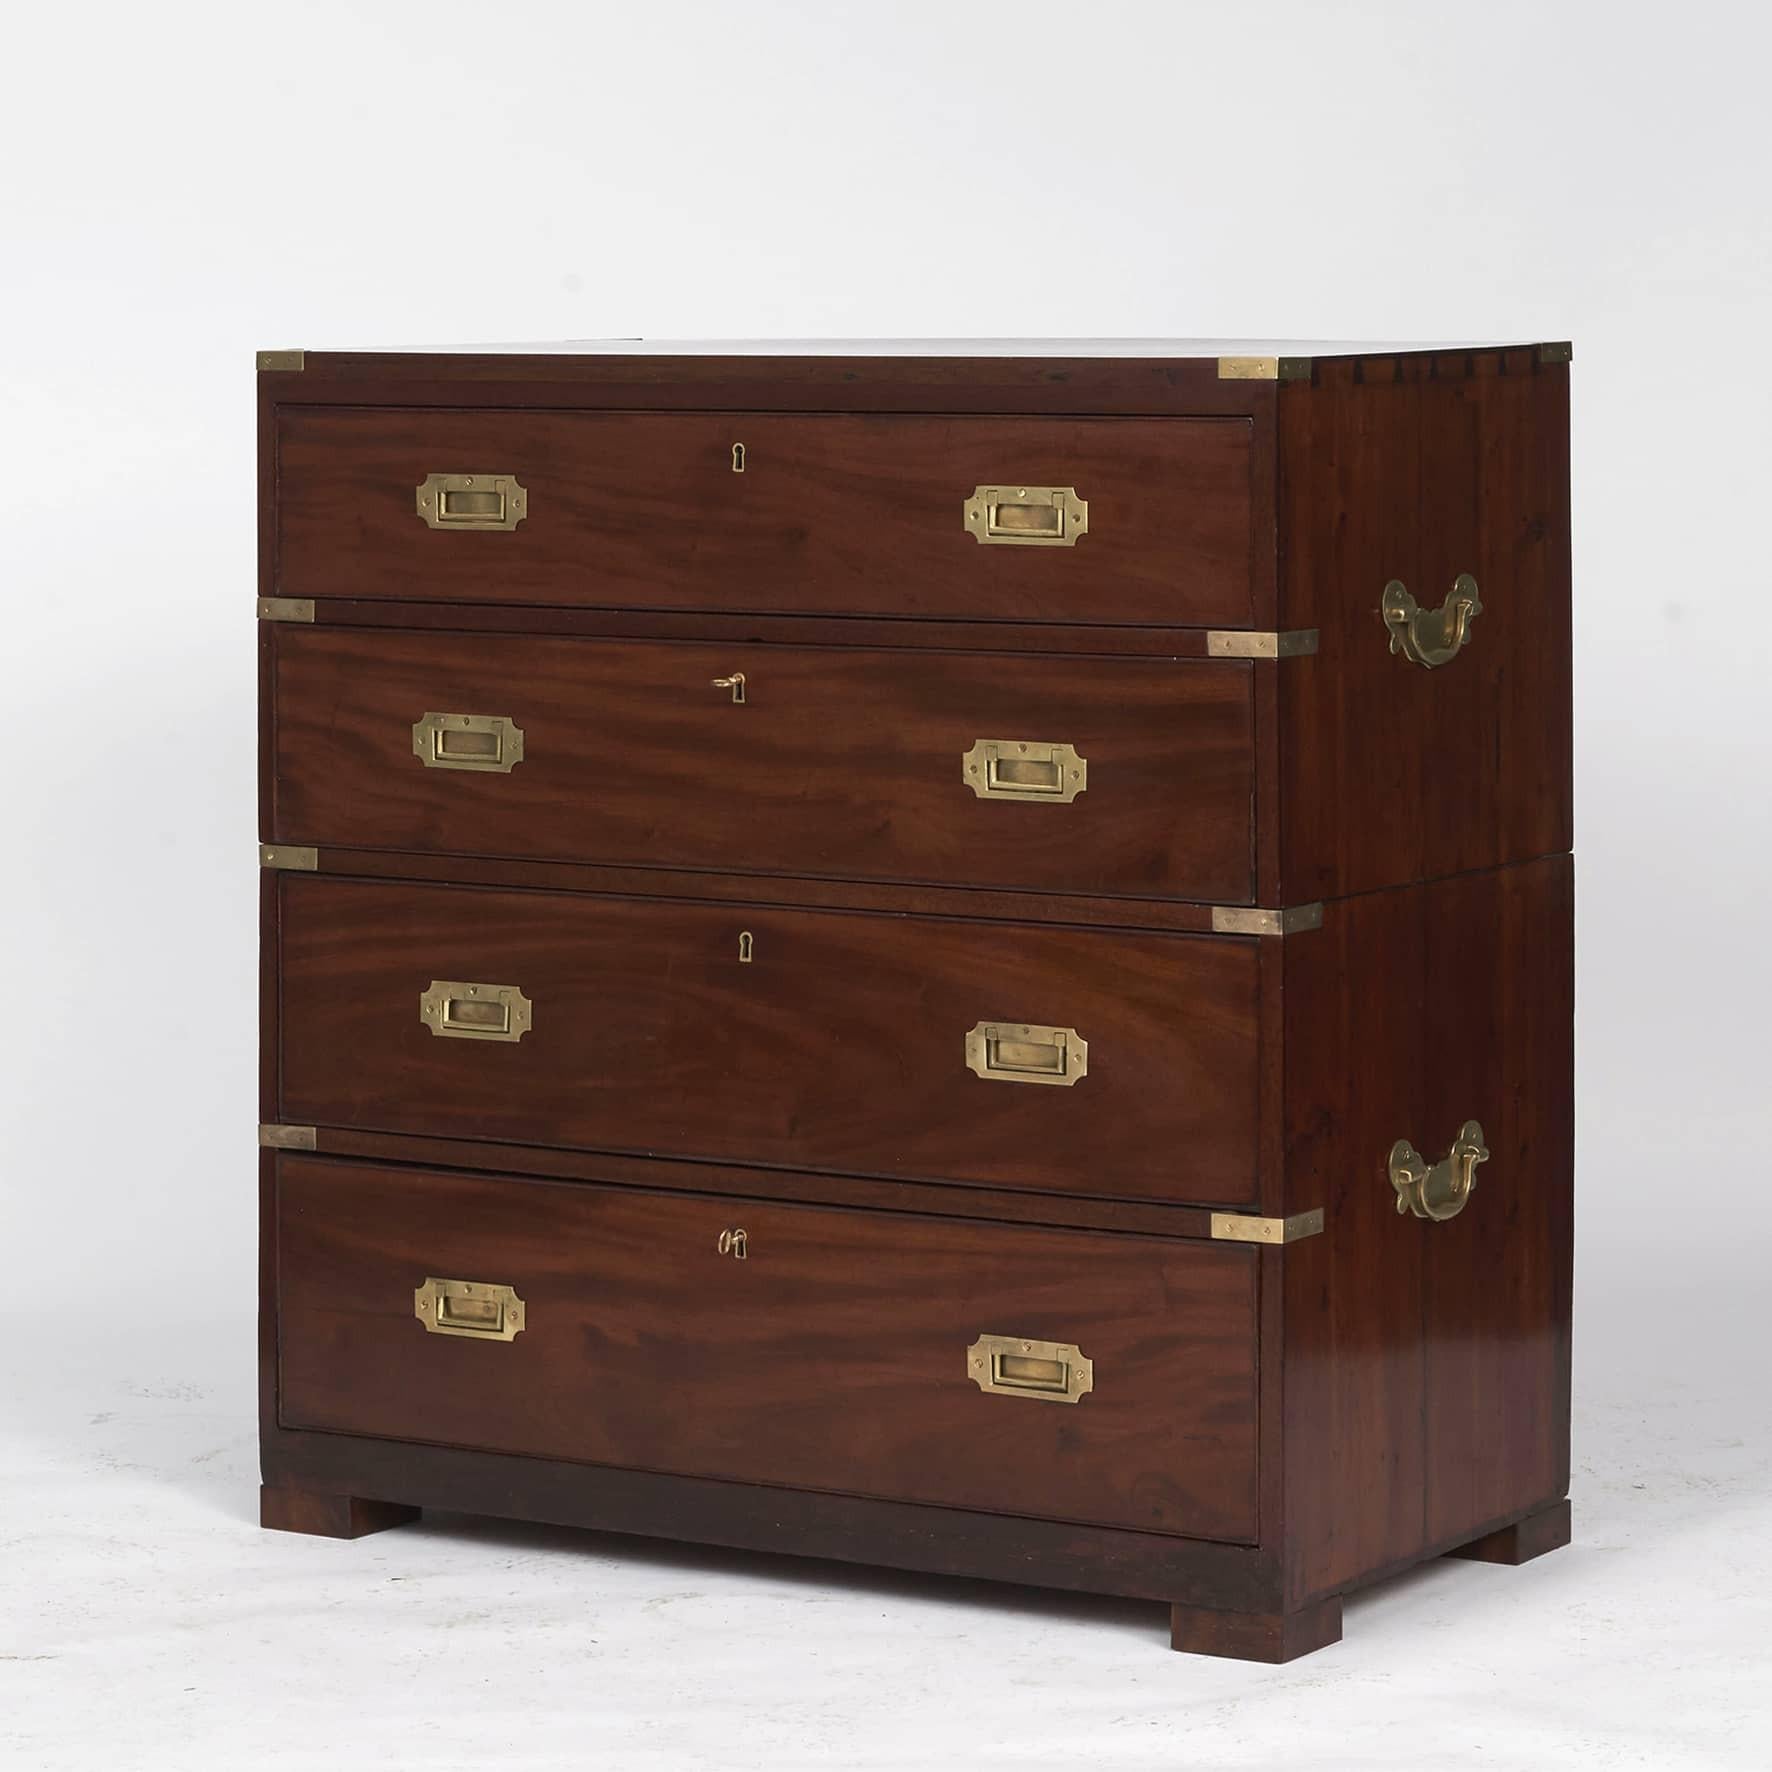 English military officer’s Campaign chest of drawers in two parts
Made in mahogany with original brass fittings carrying handle.
In great condition, repolished.
England 1850-1880.

Campaign -era chests were the travel items of British military